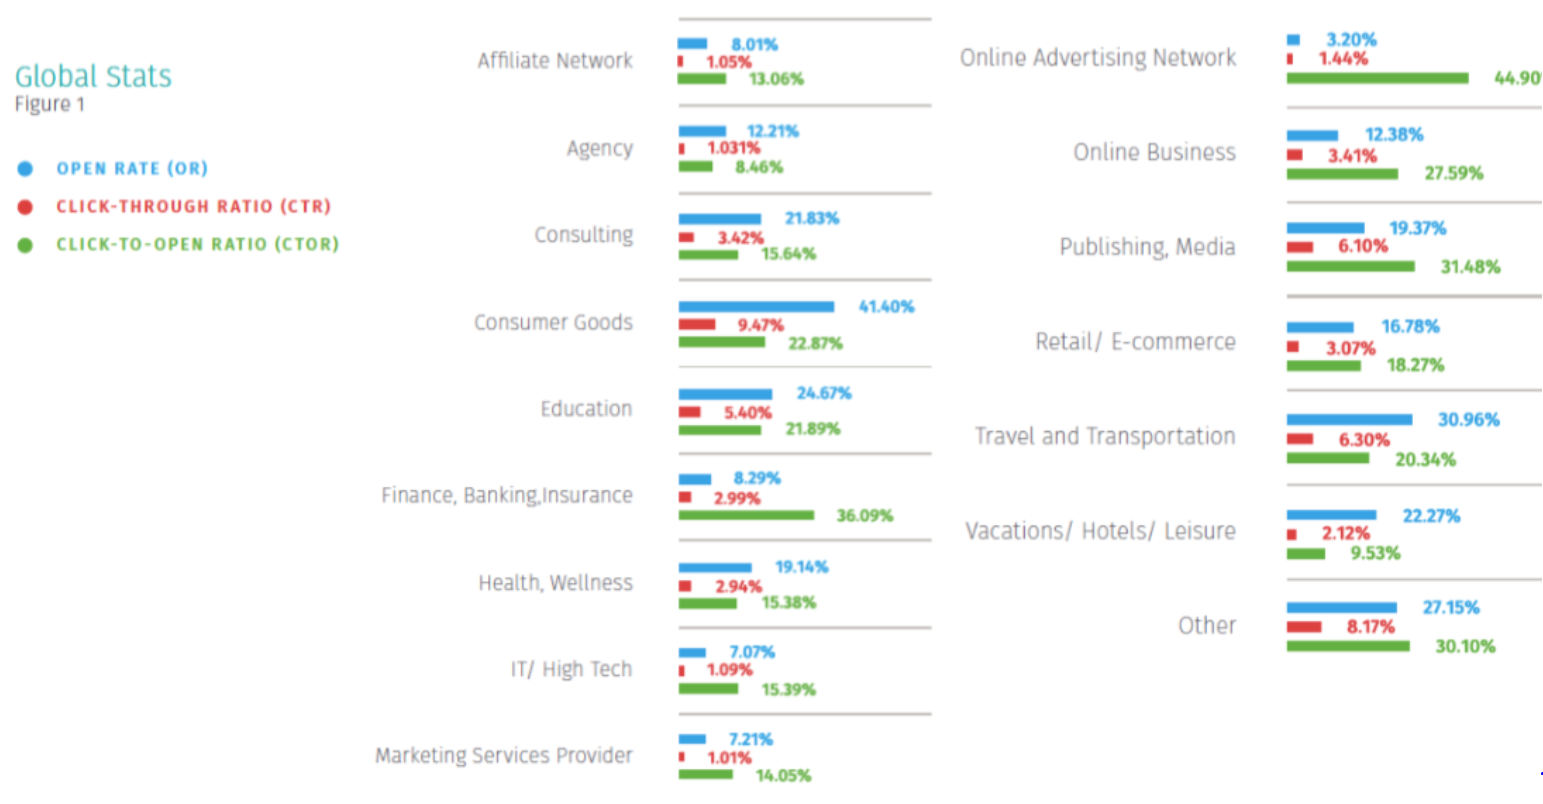 statistiques email marketing